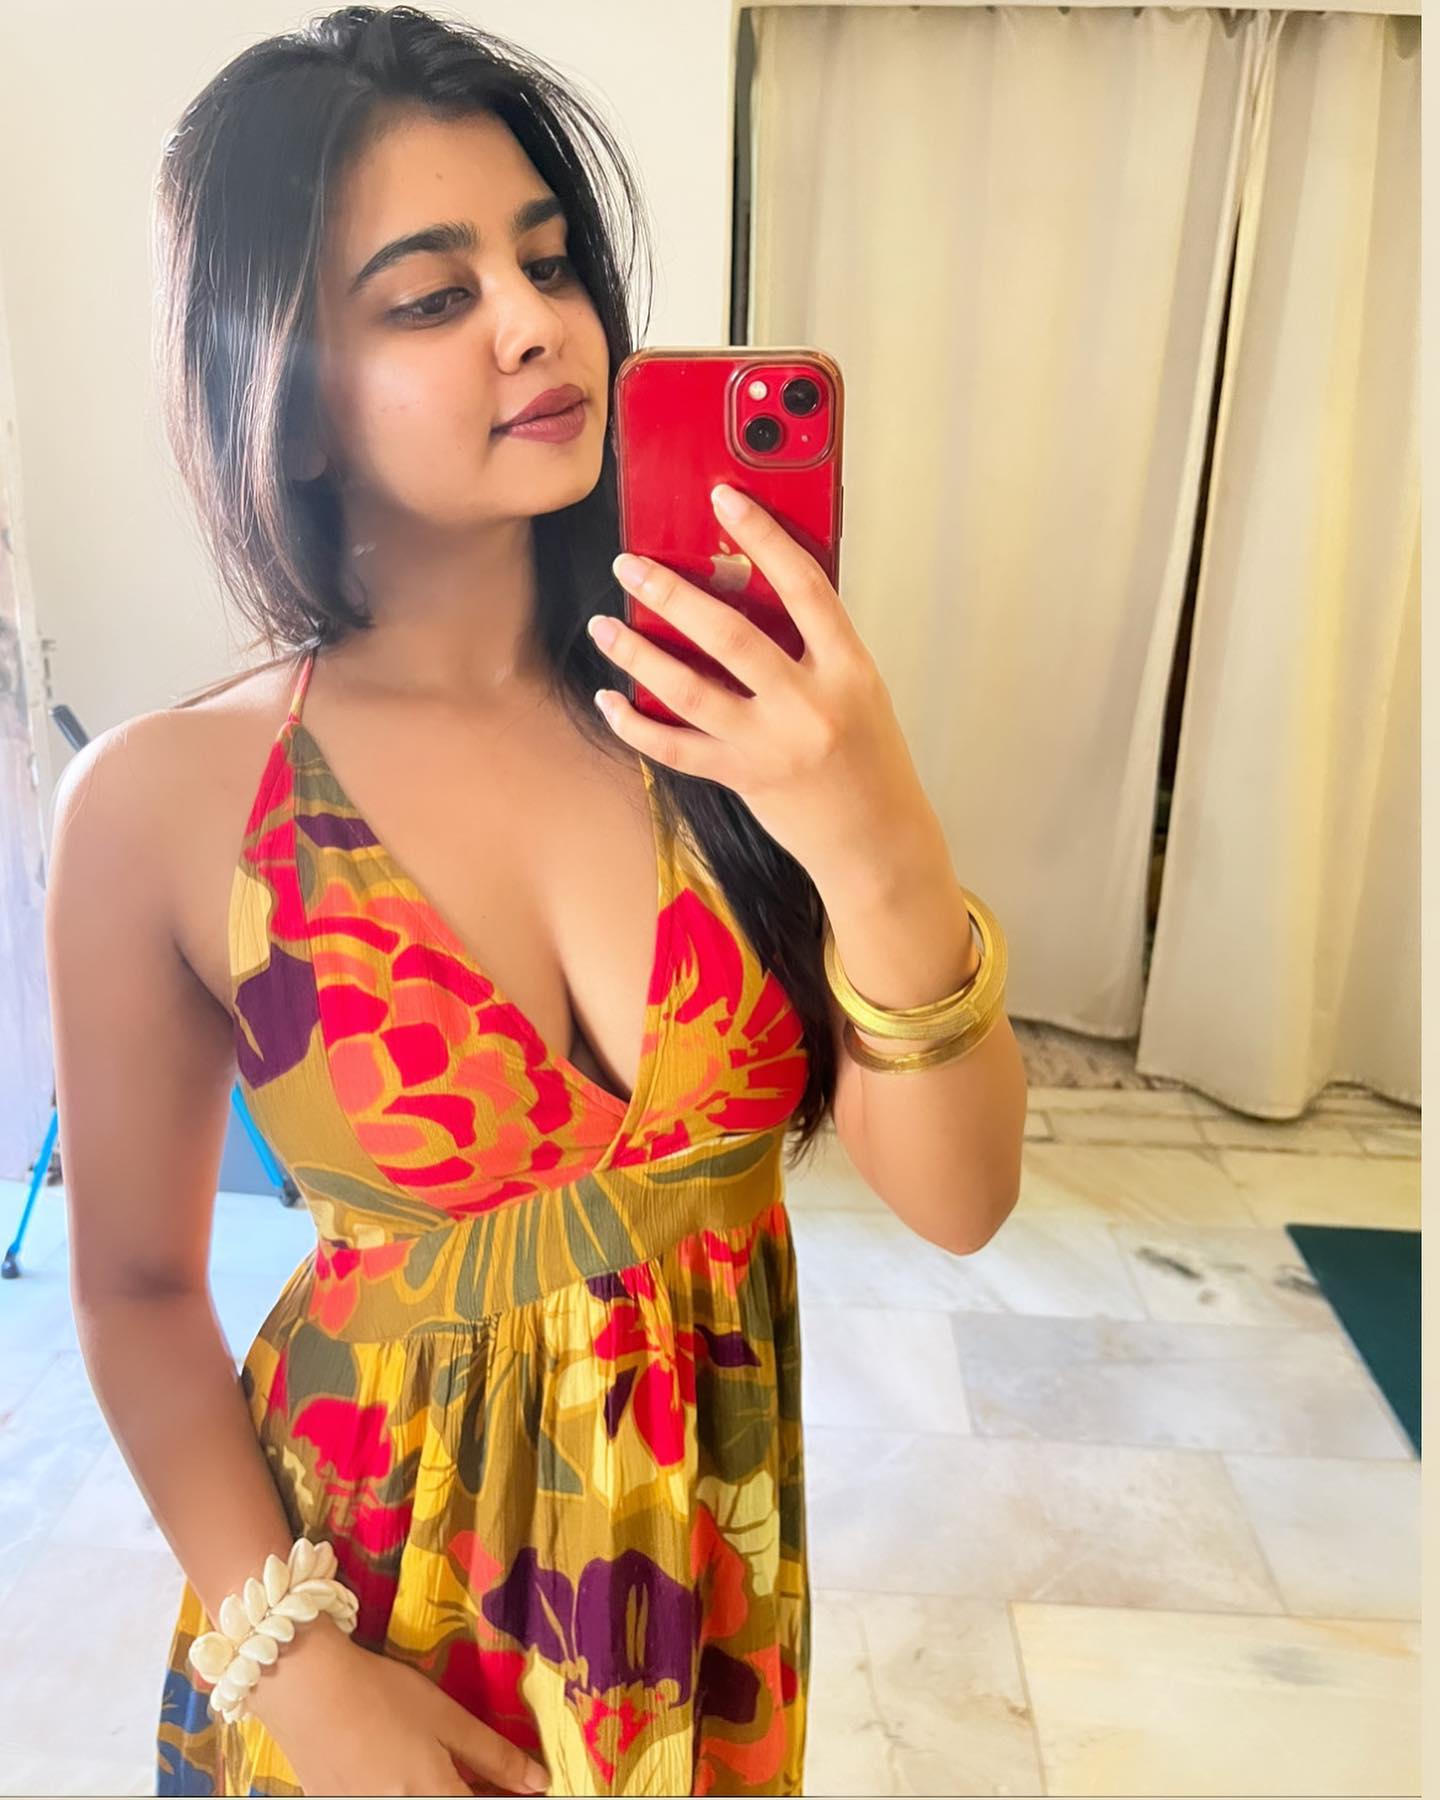 Low Price CASH PAYMENT Hot Sexy Latest Genuine College Girl berhampur,